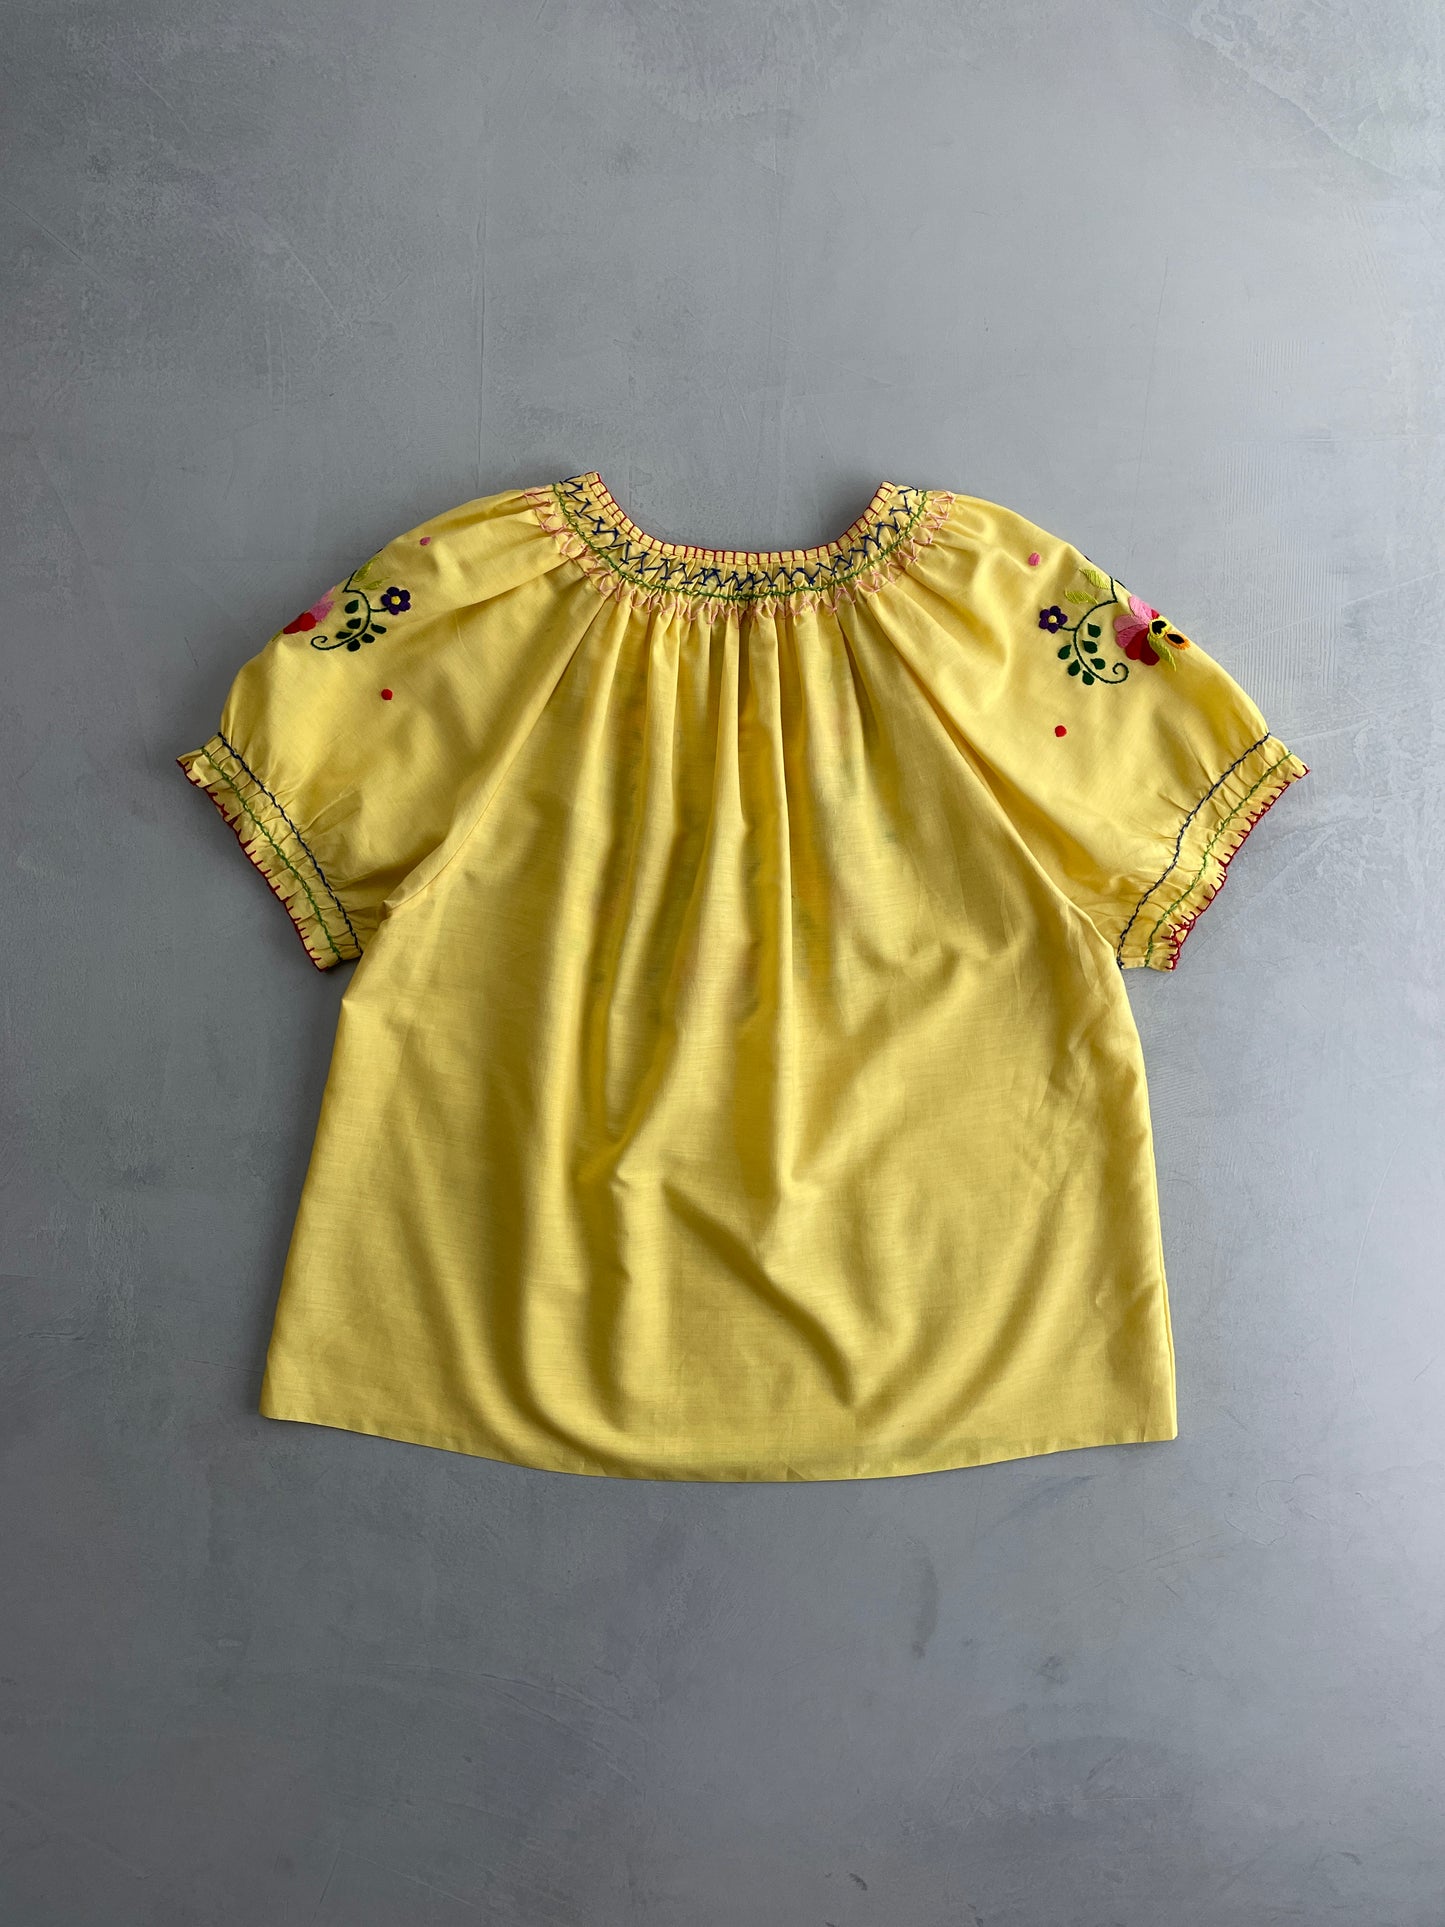 70's Embroidered Hungarian Blouse [W6-8]